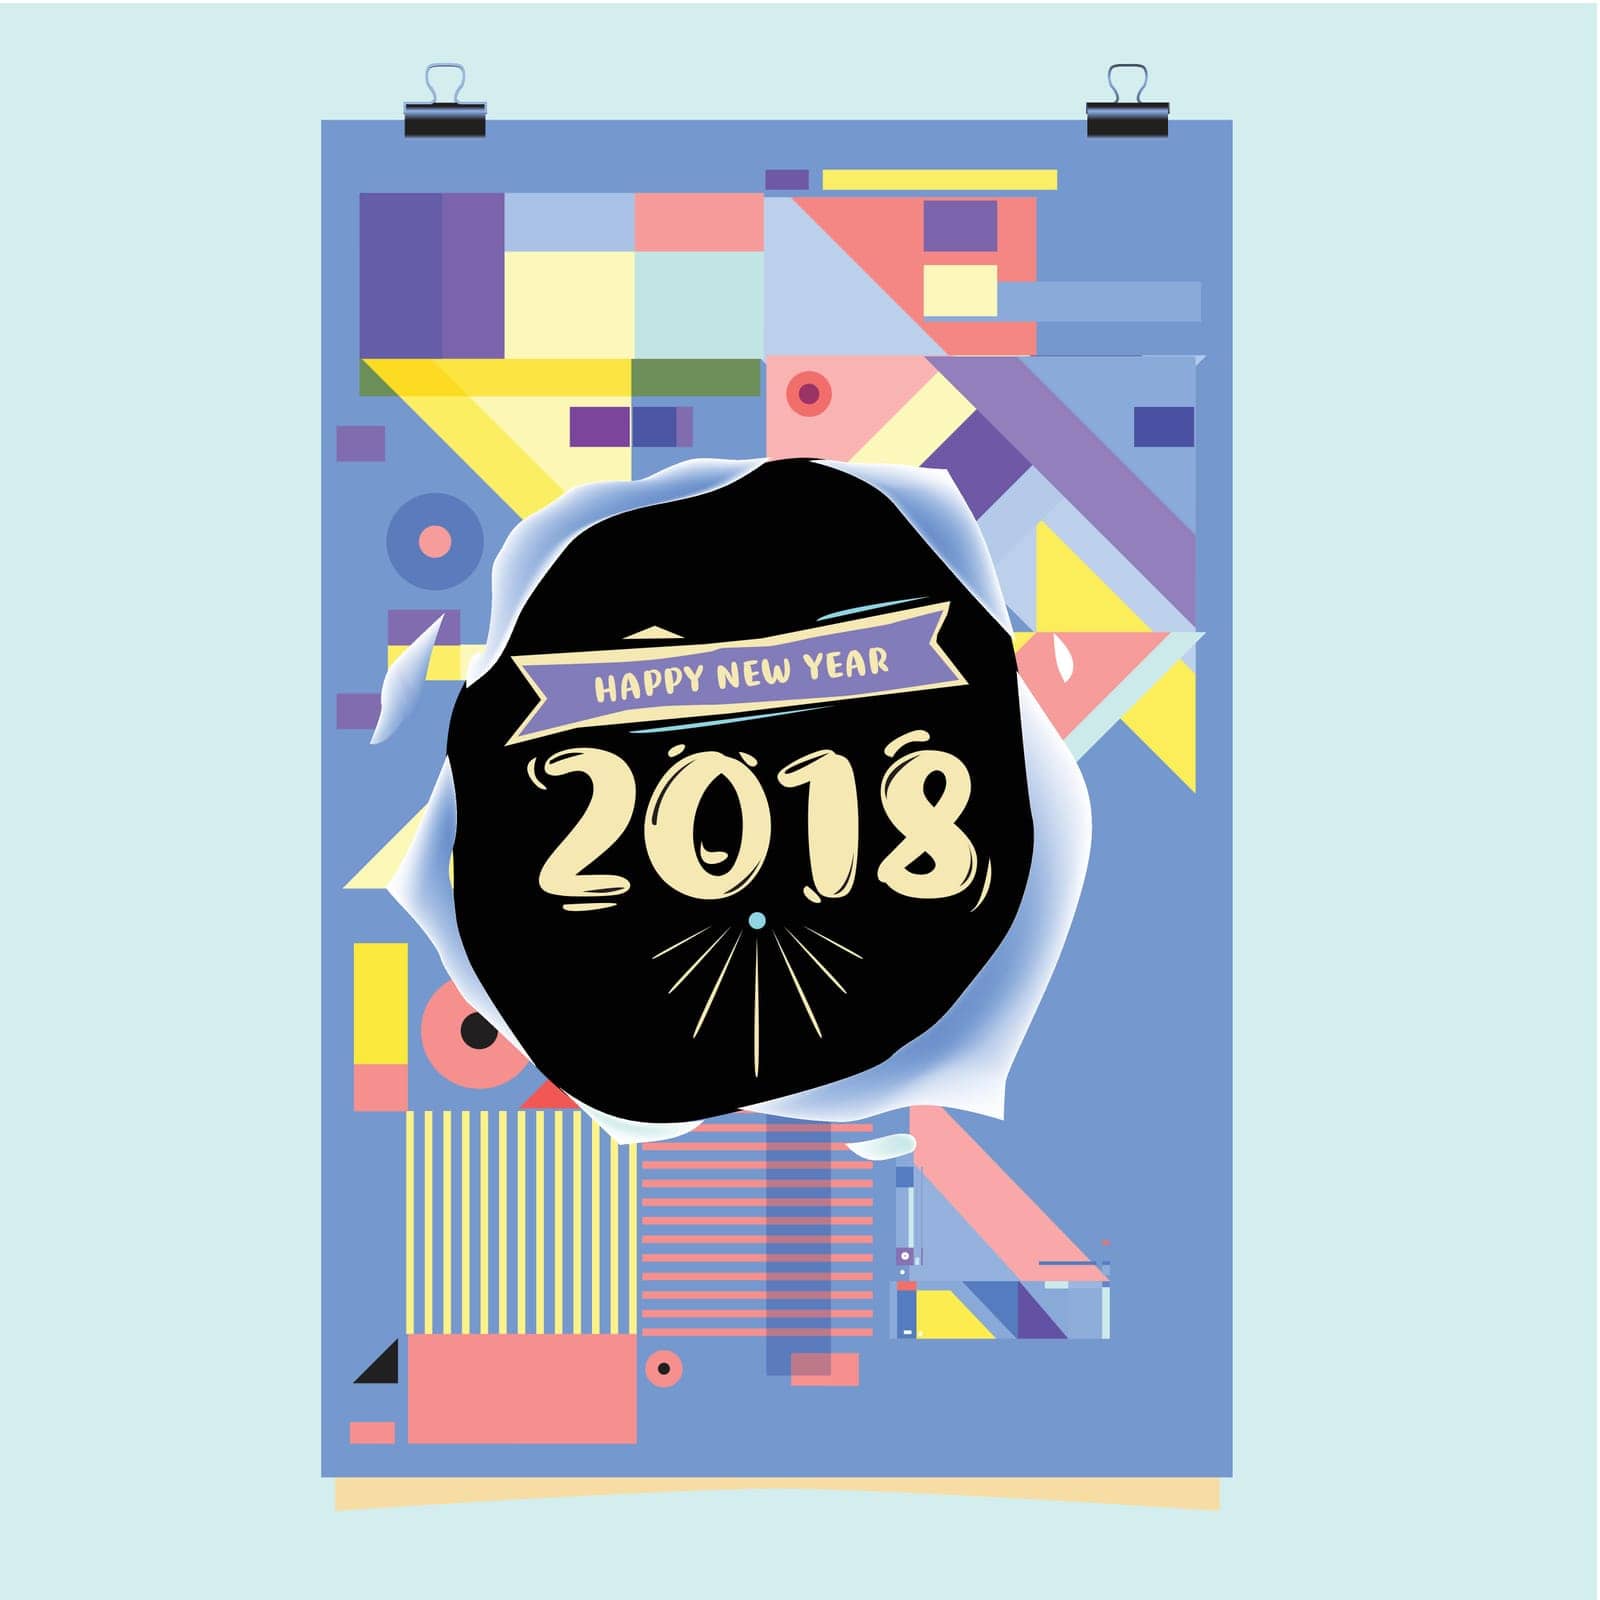 date,symbol,typography,year,happy,greeting,type,cover,annual,day,element,new,celebrate,invitation,cheerful,decorative,christmas,square,celebration,background,geometric,style,poster,party,card,colorful,template,winter,holiday,ornament,happiness,eve,design,vector,event,xmas,calendar,memphis,set,display,festive,retro,banner,2021,abstract,layout,multicolored,2018,illustration